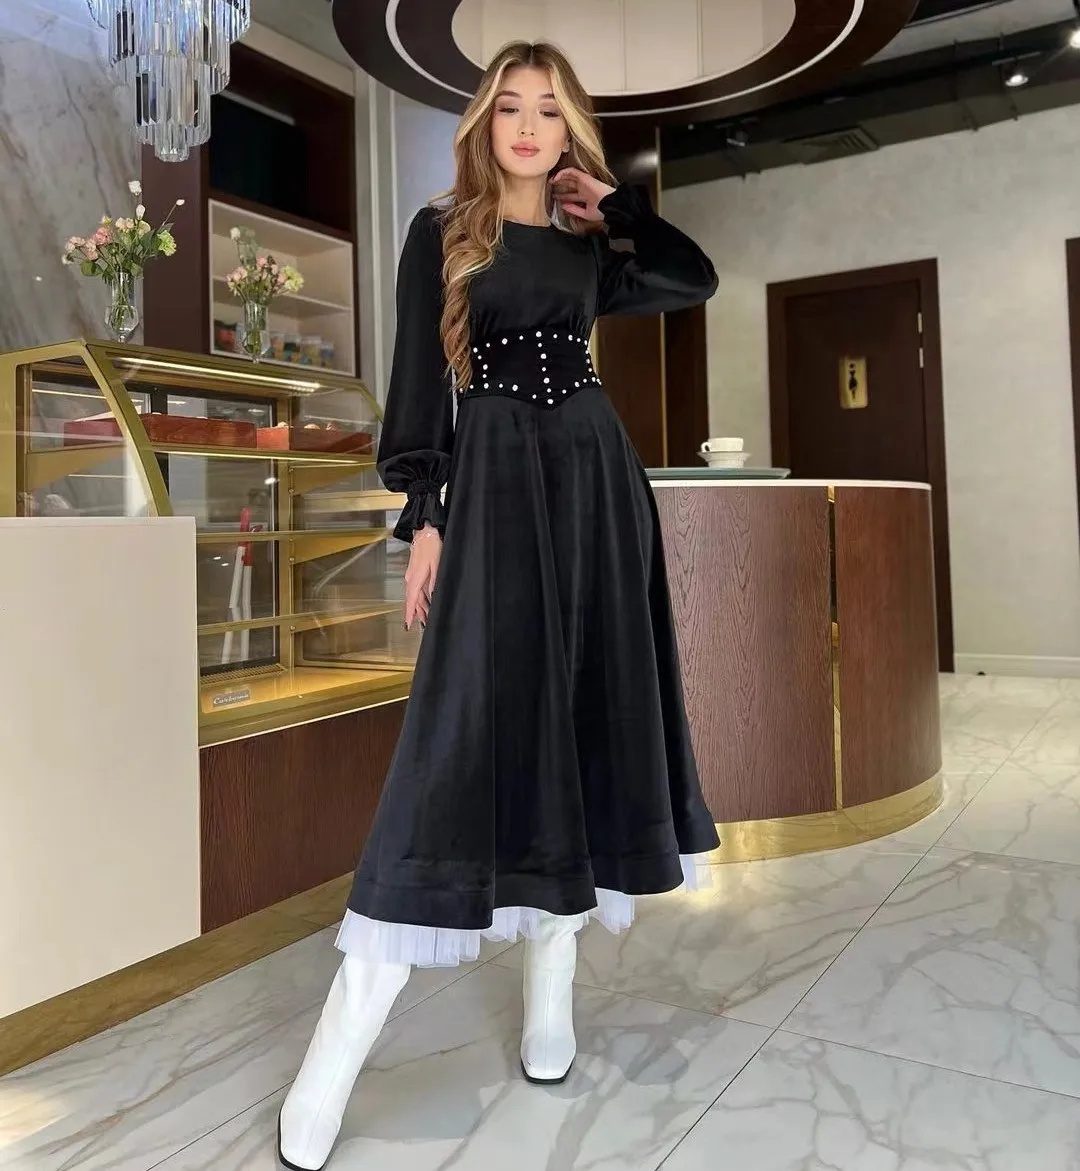 

Sayulita Black Velour White Tulle A Line Prom Dresses Beaded Sash Crew Neck Cocktail Party Evening Gown Long Sleeves Bride Dress